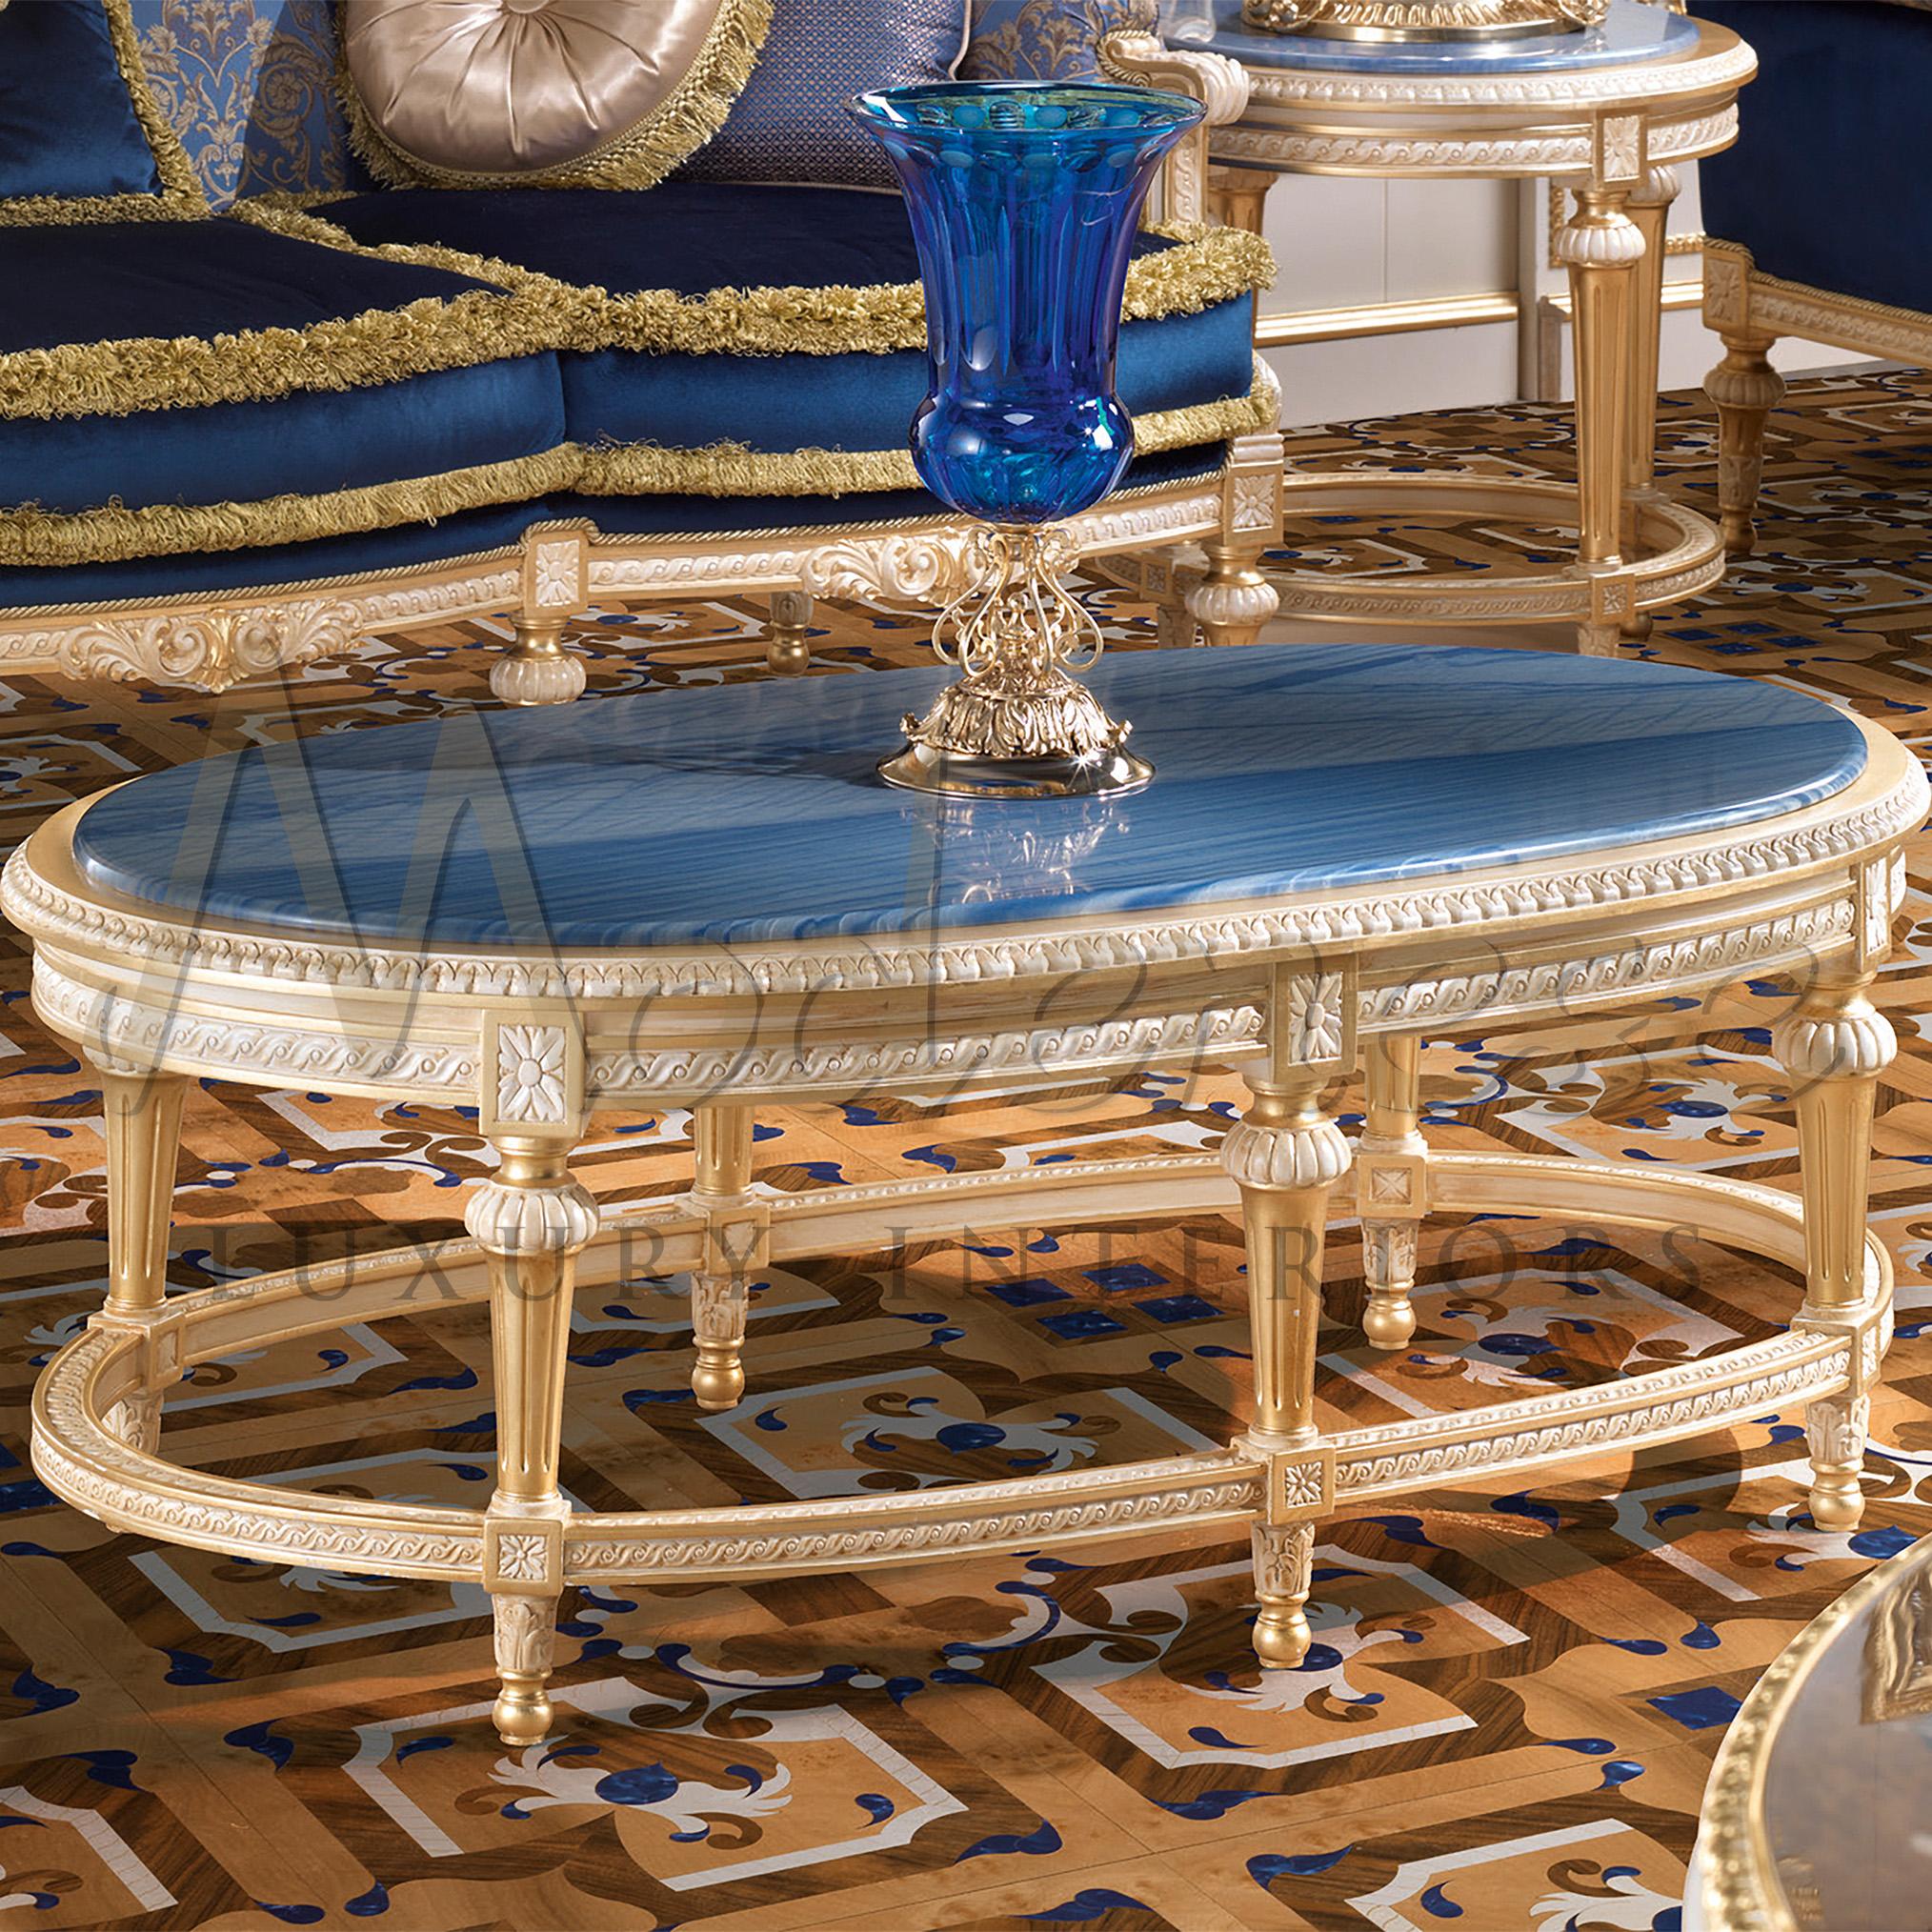 Modenese artisans knowledge of gold leaf applications goes beyond imagination. The true essence of their work is shown through this magnificent oval coffee table, that catches the eye with its tasteful combination of Azul Macaubas marble and shining